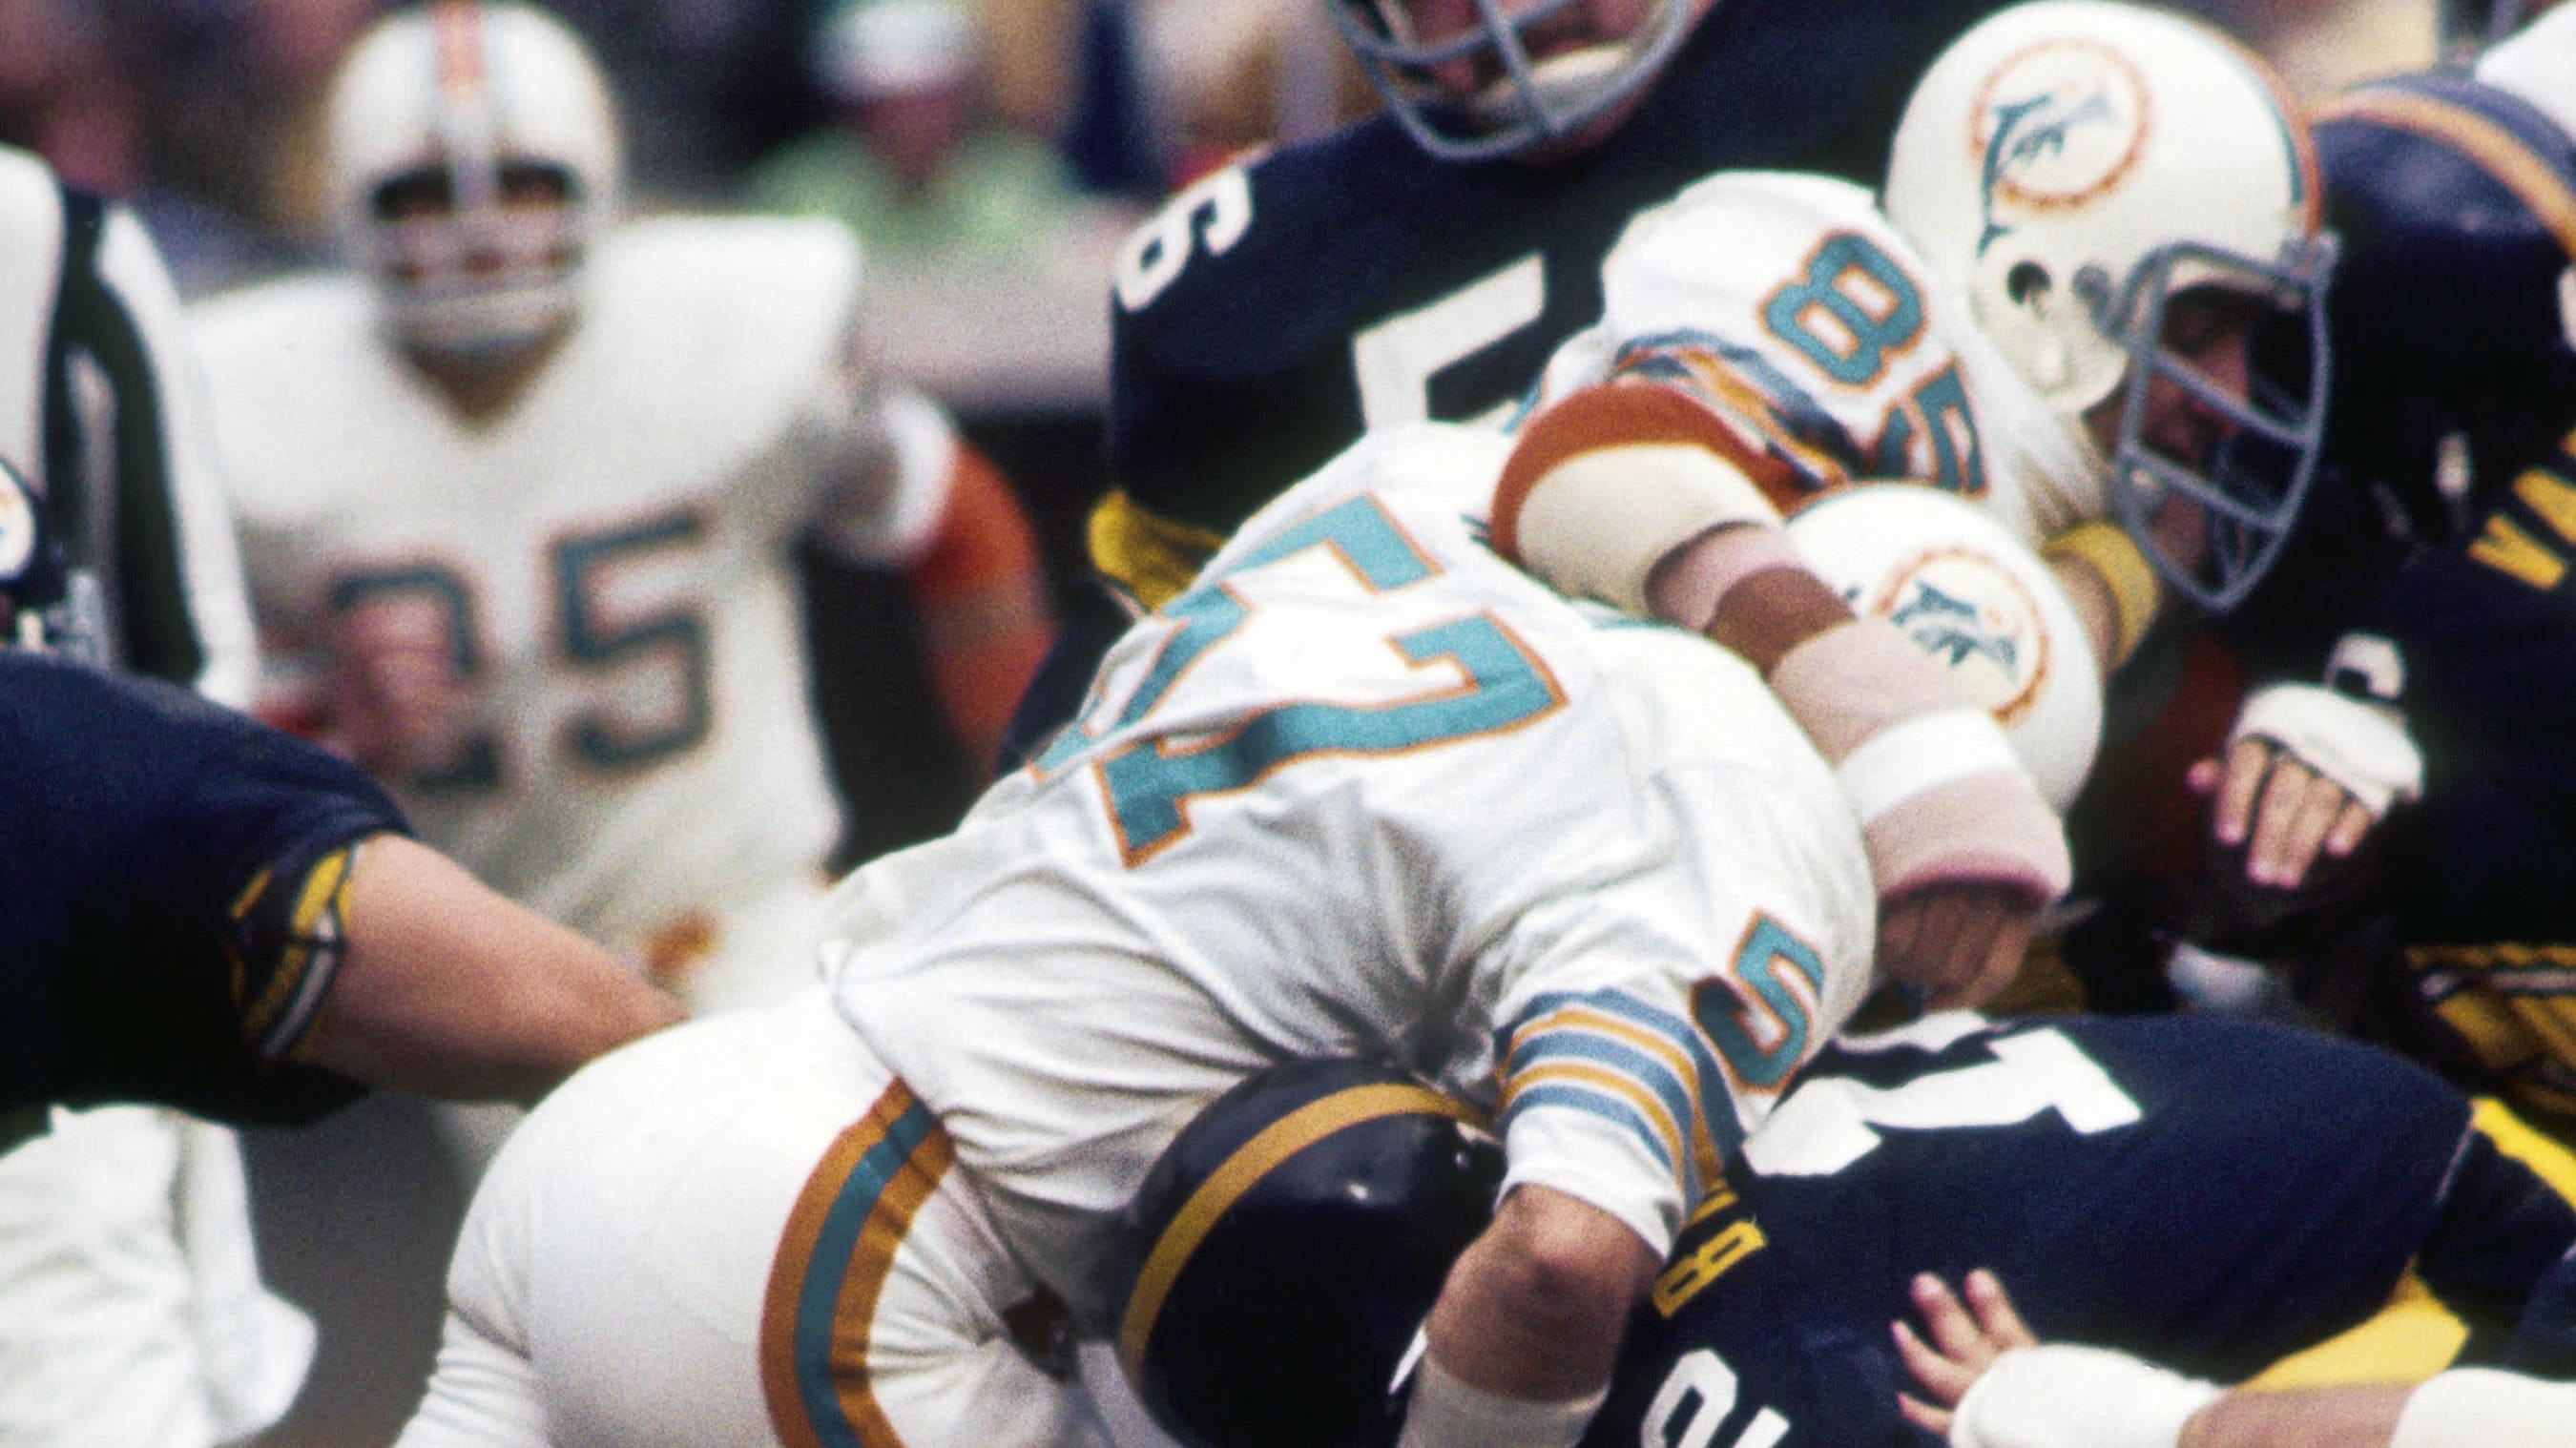 Kolen, the Dolphins’ Star Starting Linebacker, Passes Away at Age 76